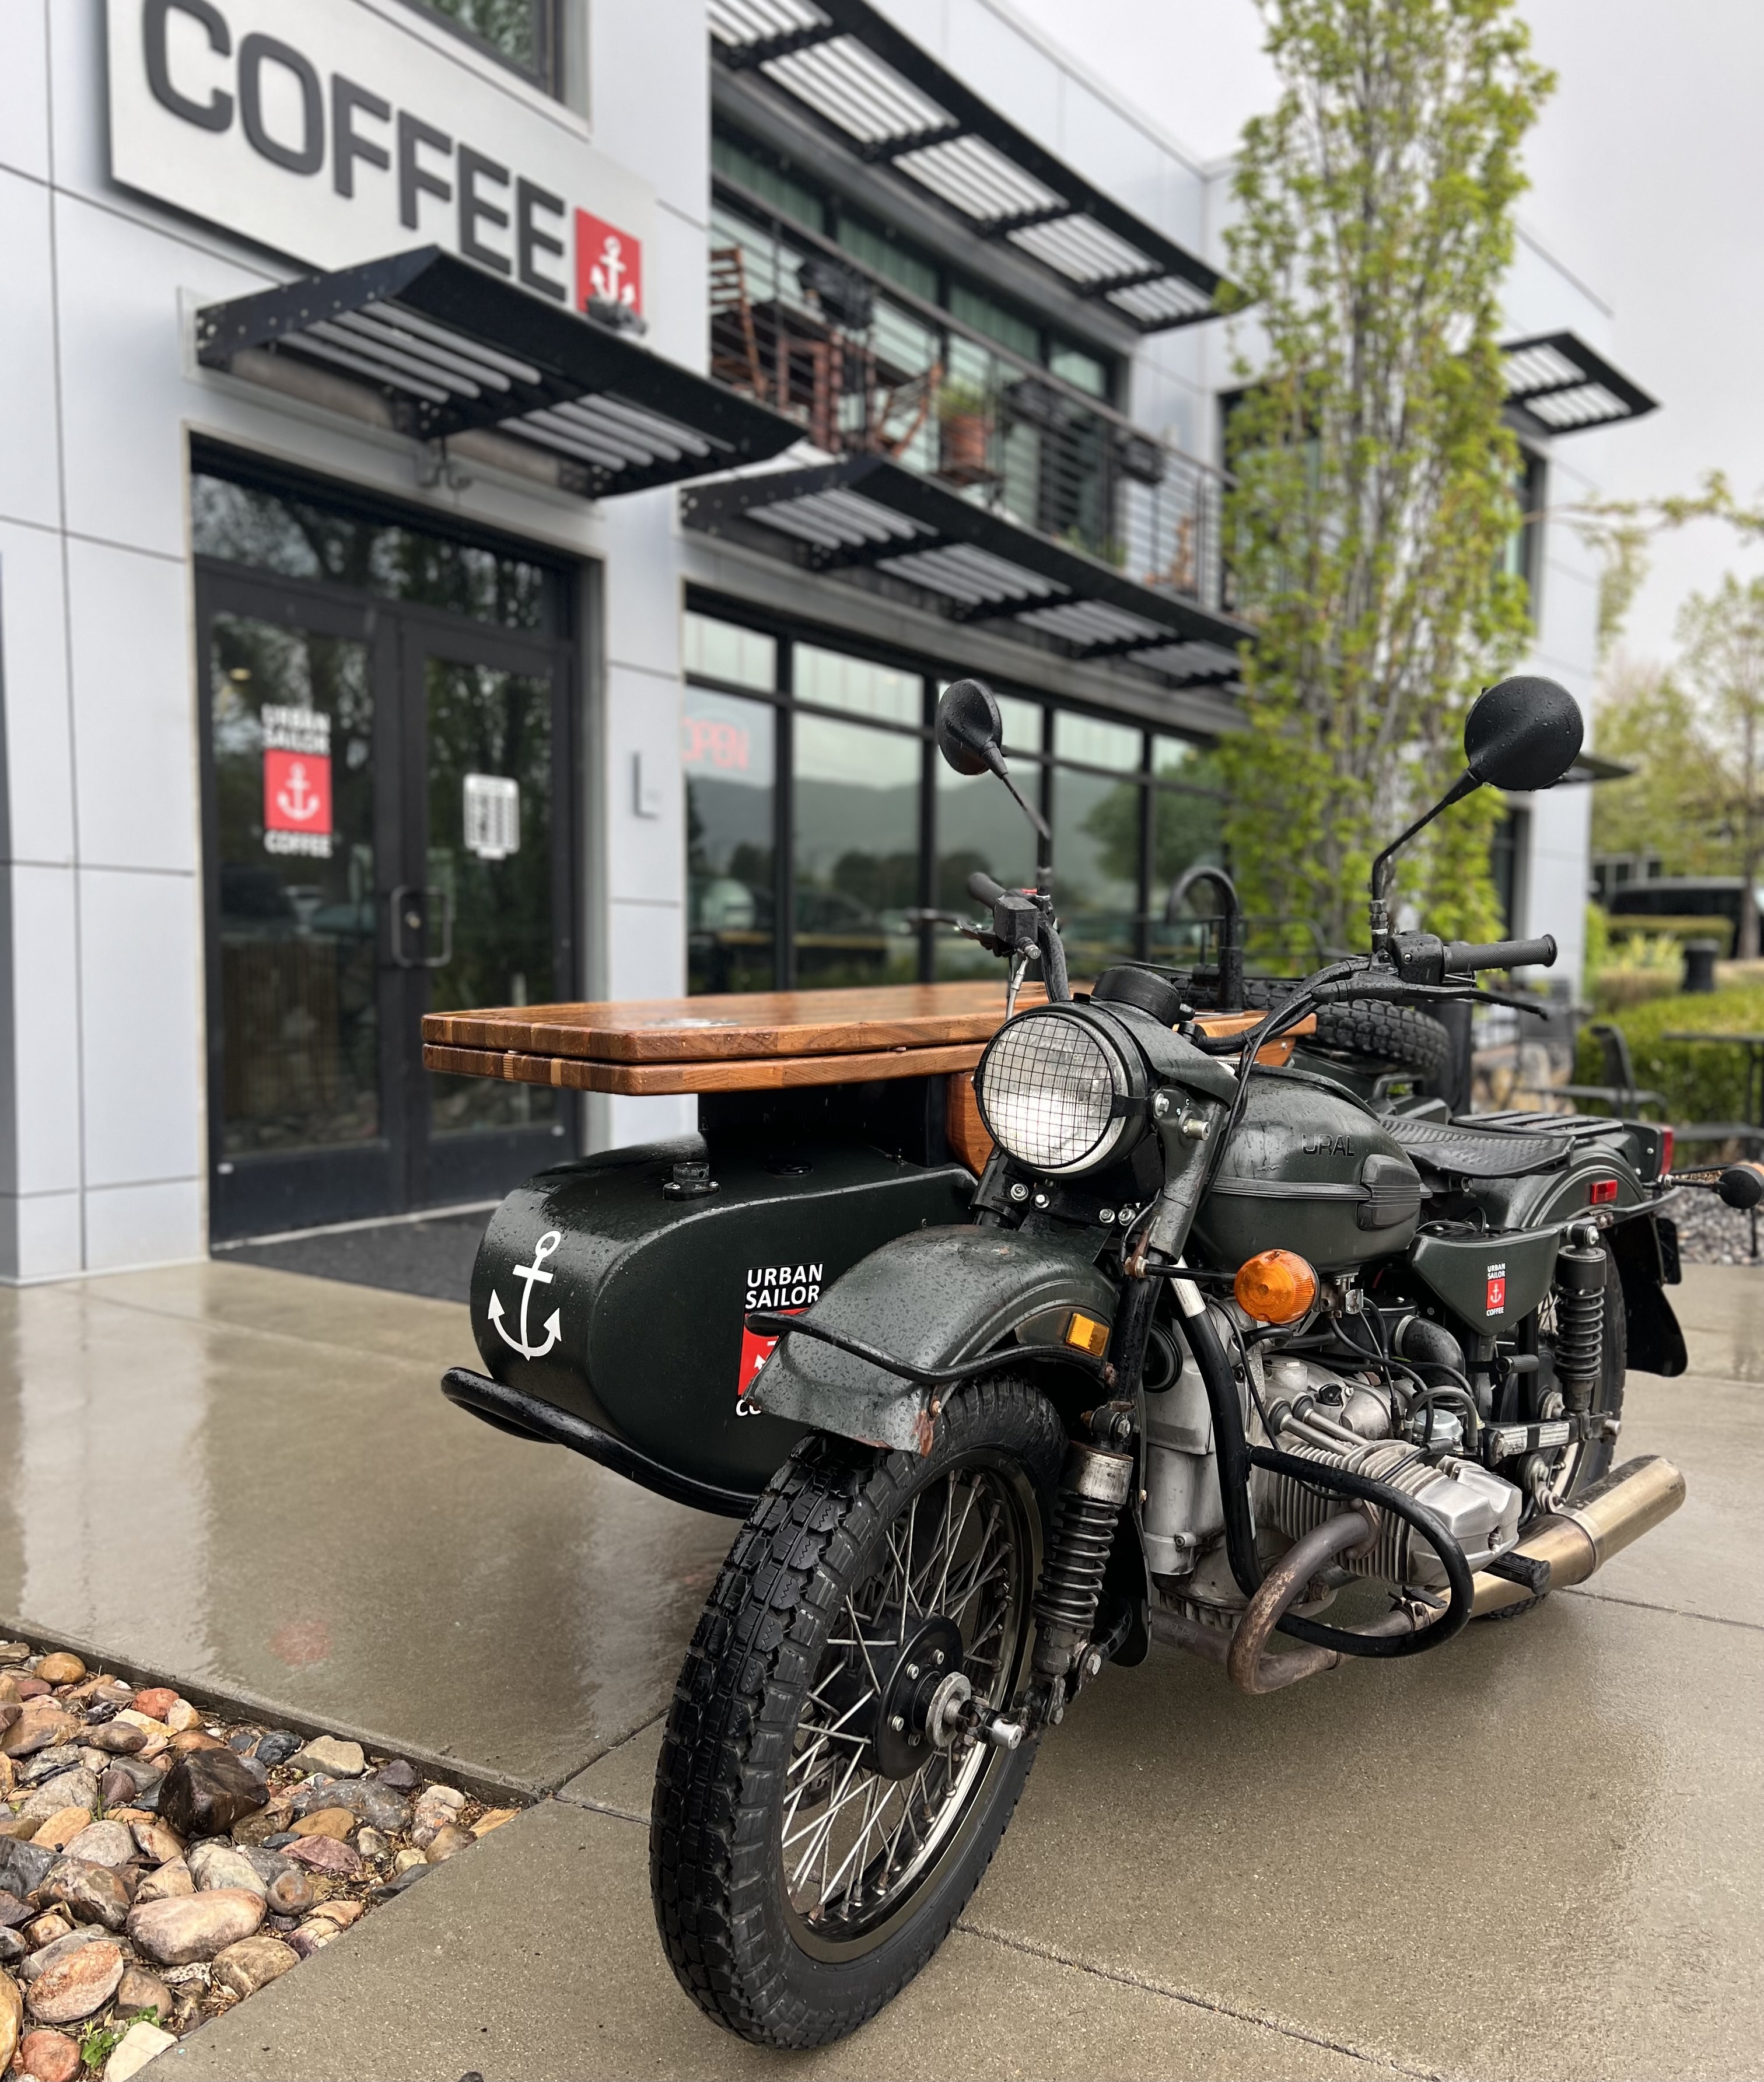 The Urban Sailor motorcycle java cart is parked outside of their brick and mortar cafe location